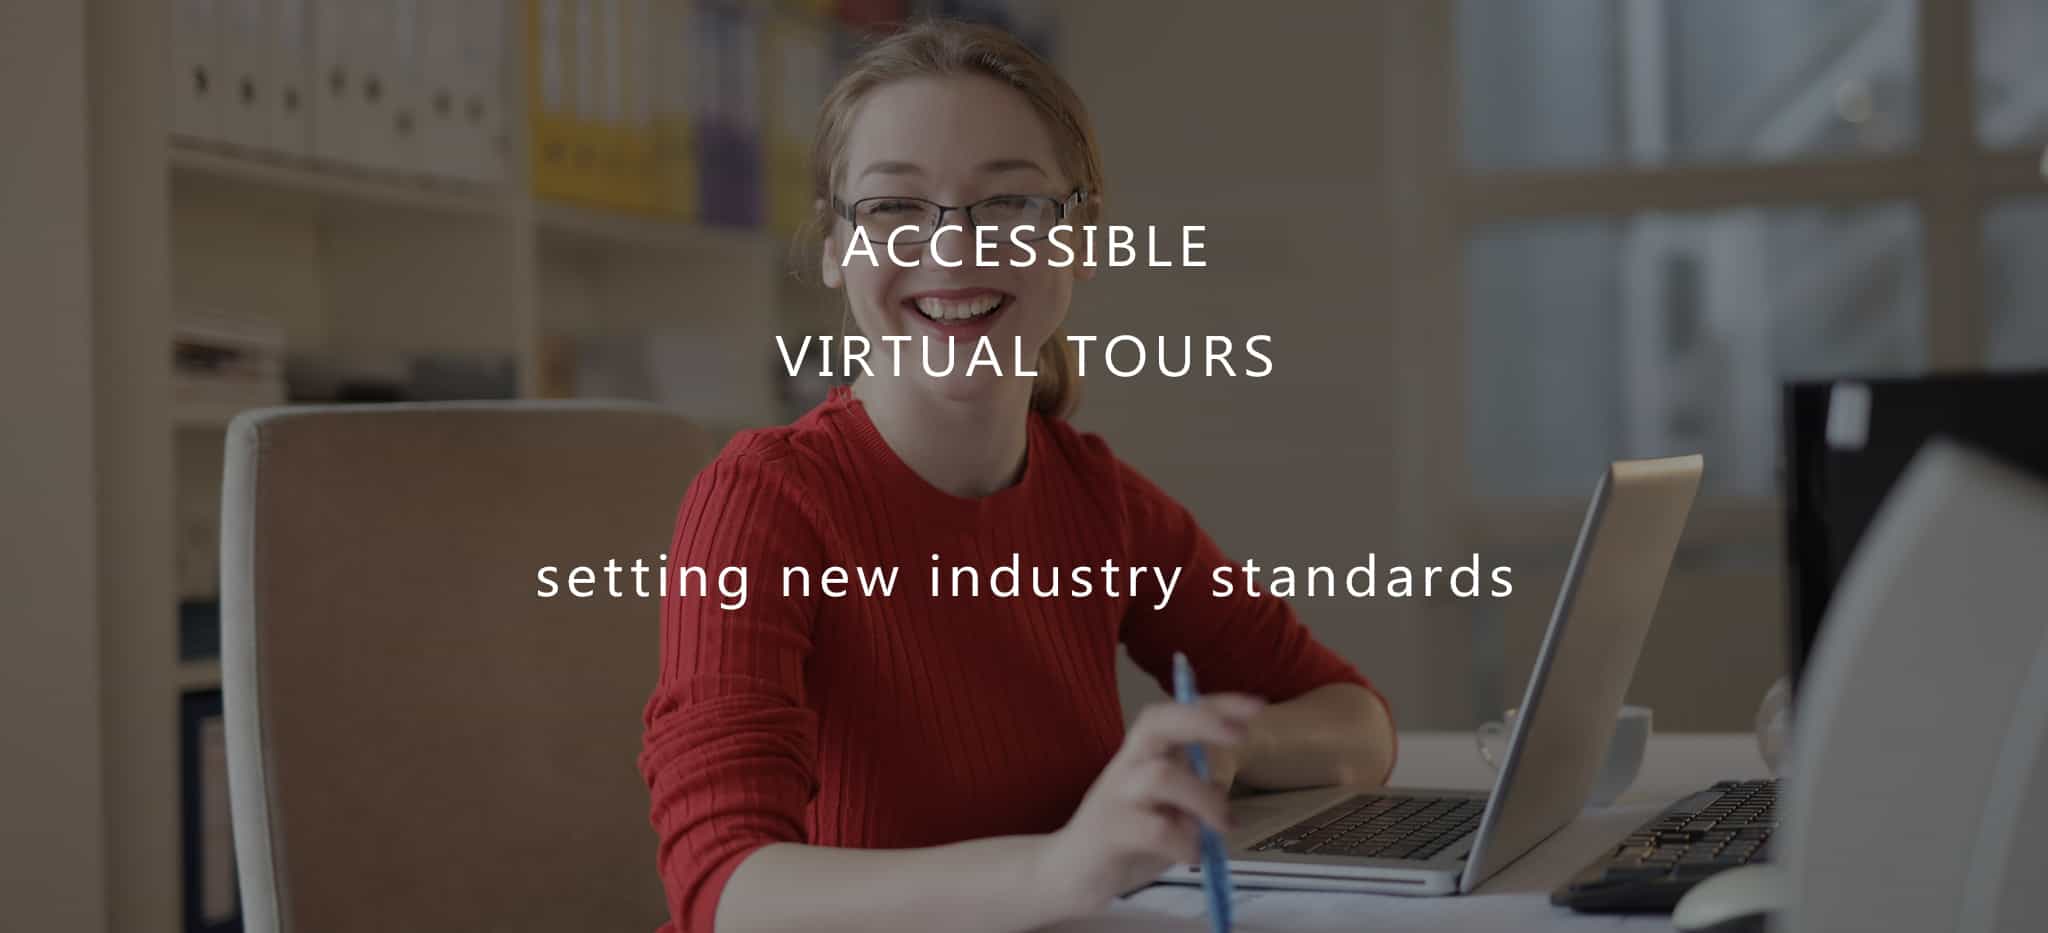 Virtual Tour Experts - Blog - Accessible Virtual Tours - Setting new industry standards - Creating Accessible Virtual Tours